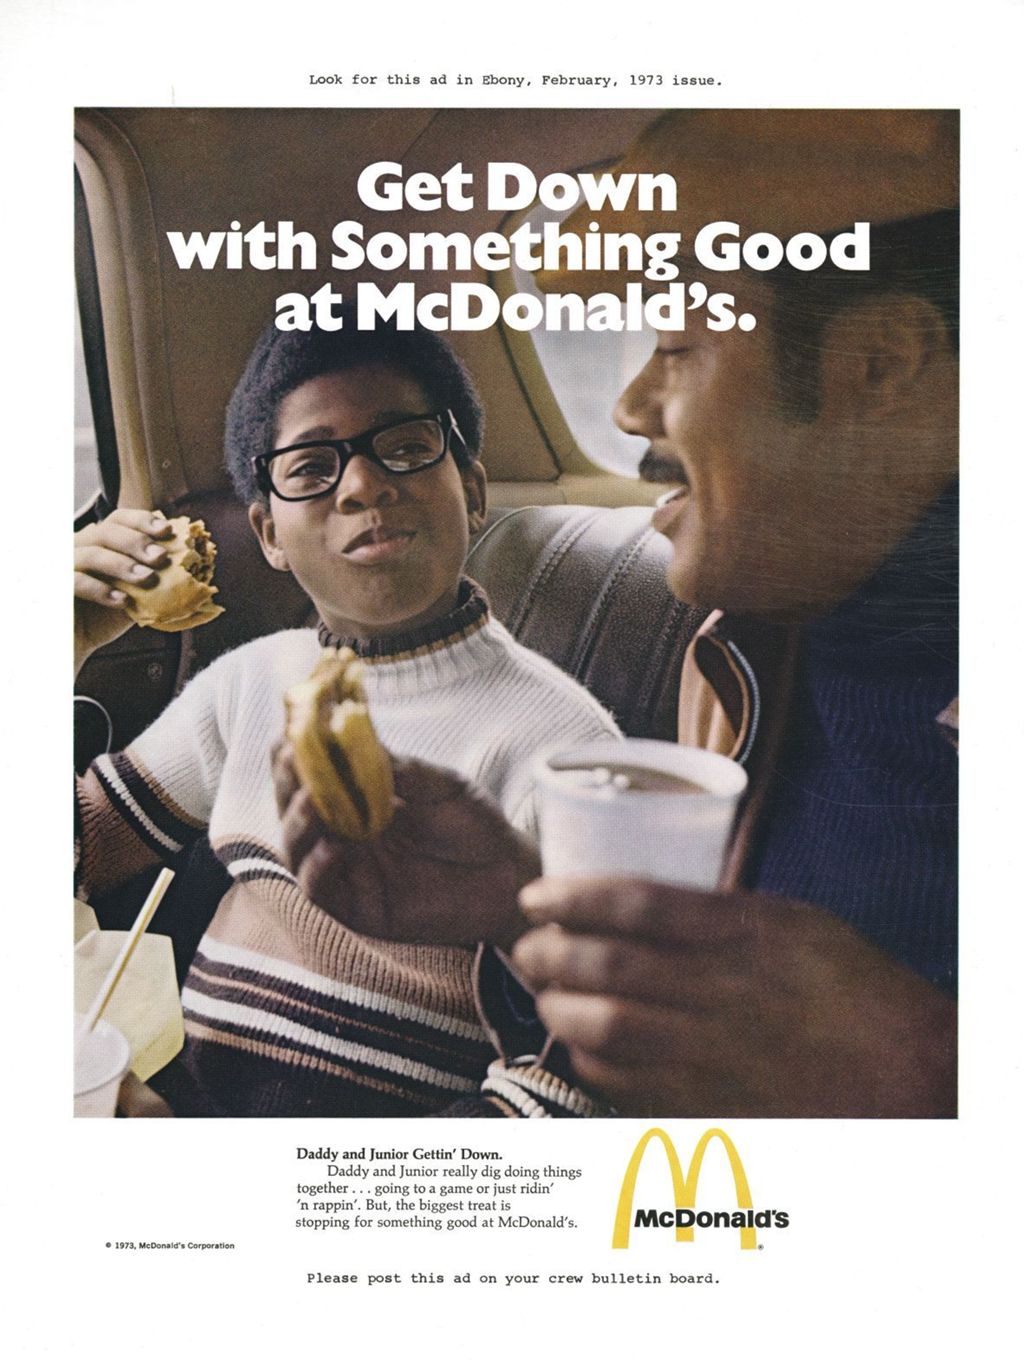 Miniature of Get Down with Something Good, McDonald's advertisement